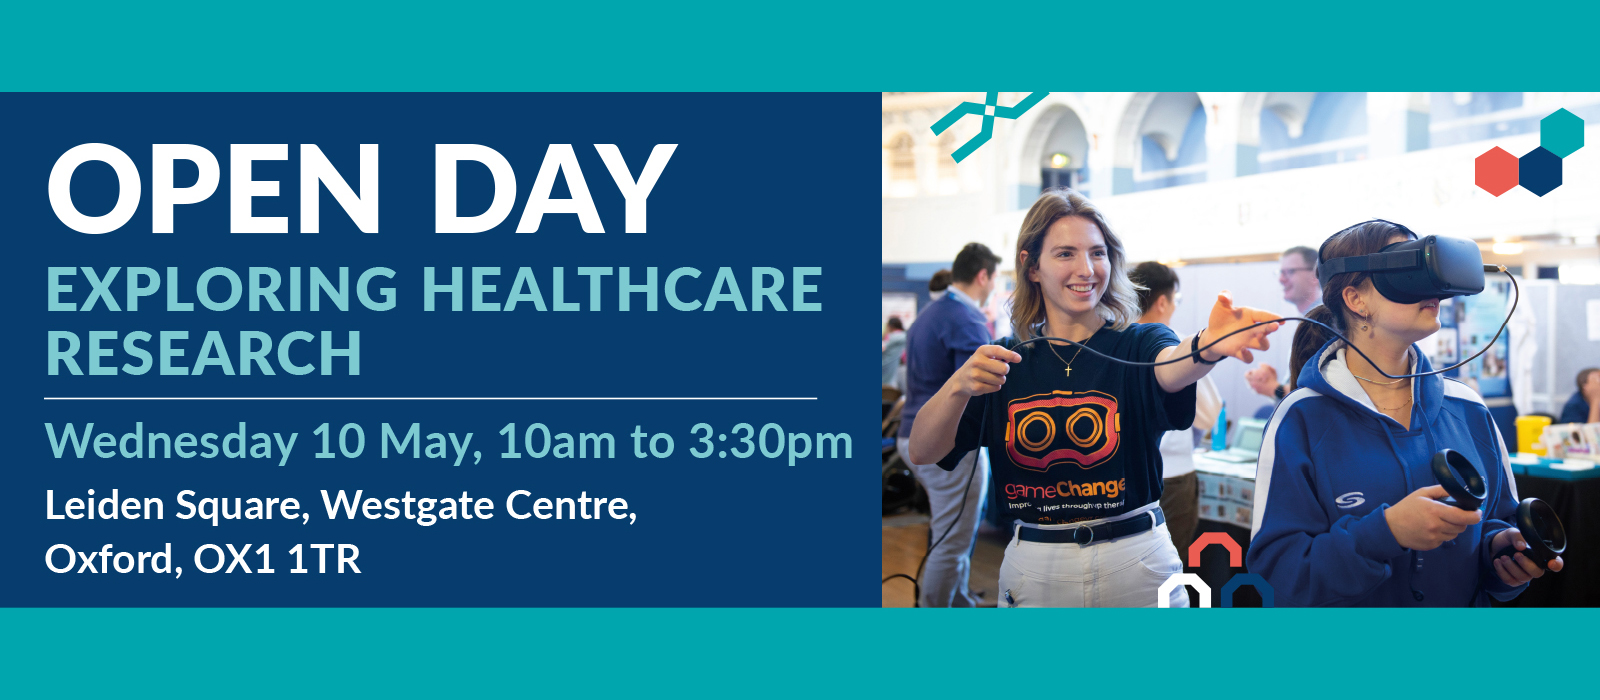 Open Day Exploring Healthcare Research